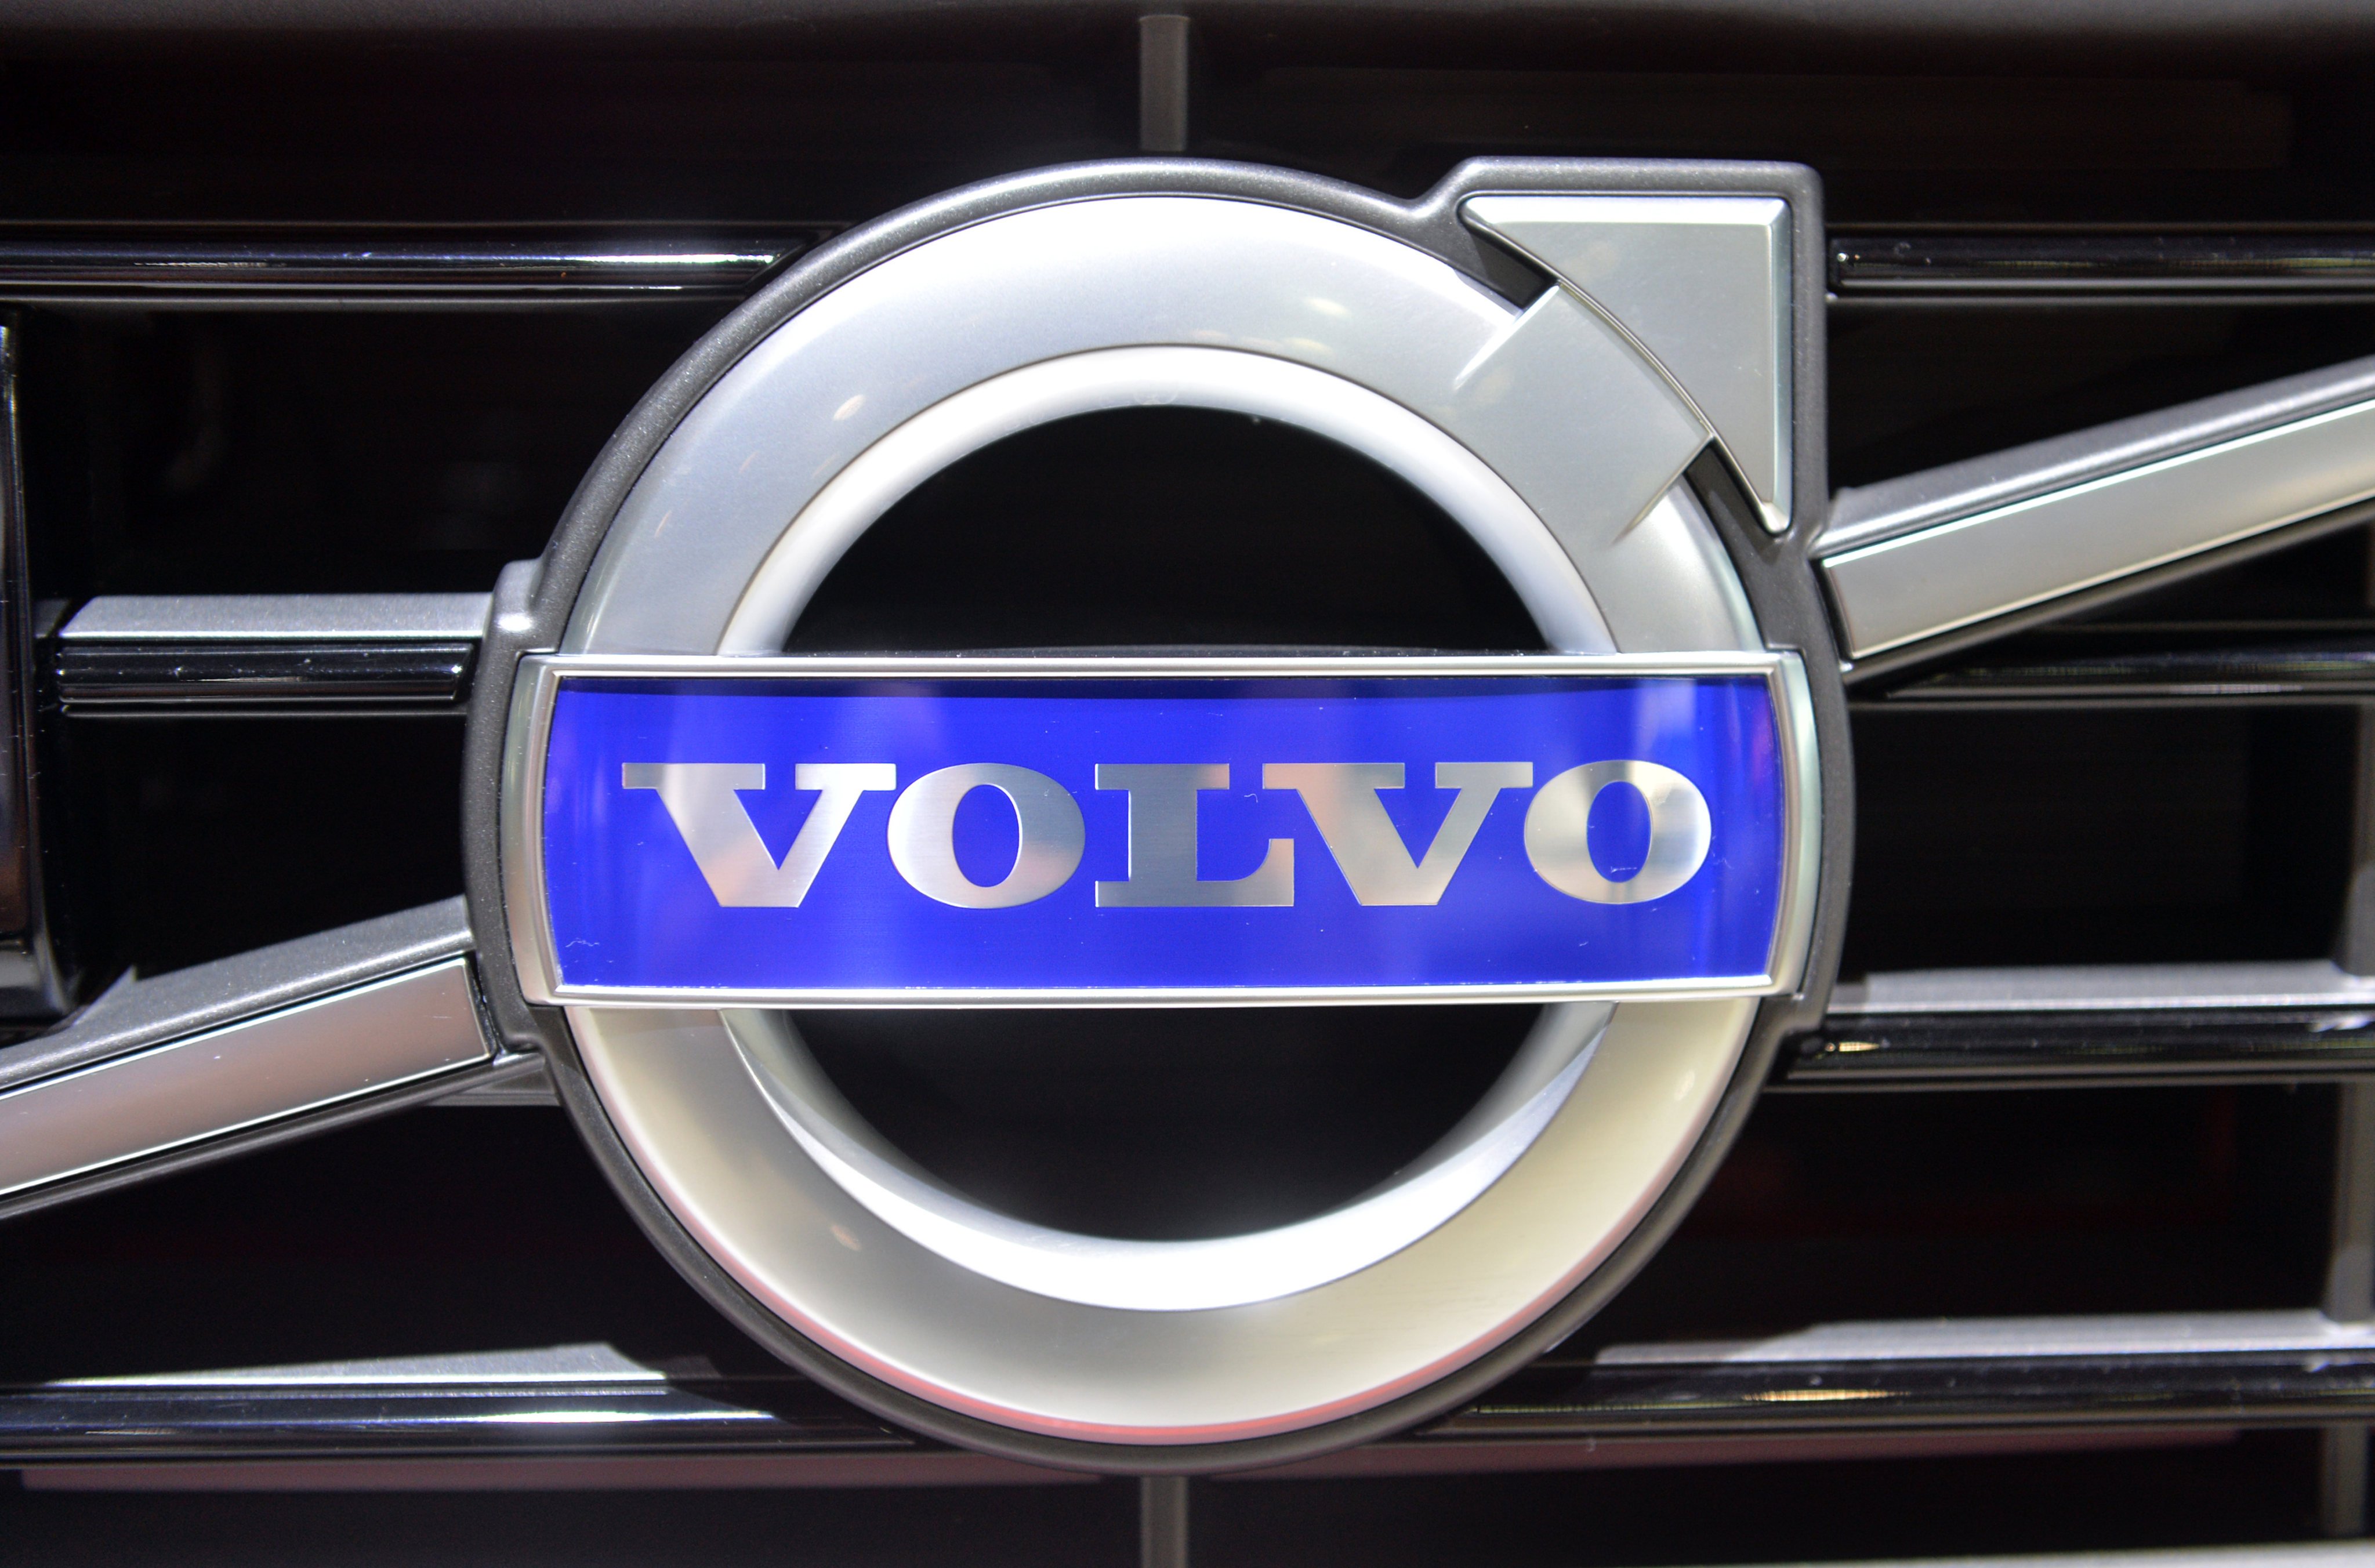 Geely-owned Volvo is seen as the most exposed among Western carmakers to the potential EU tariffs. Photo: dpa